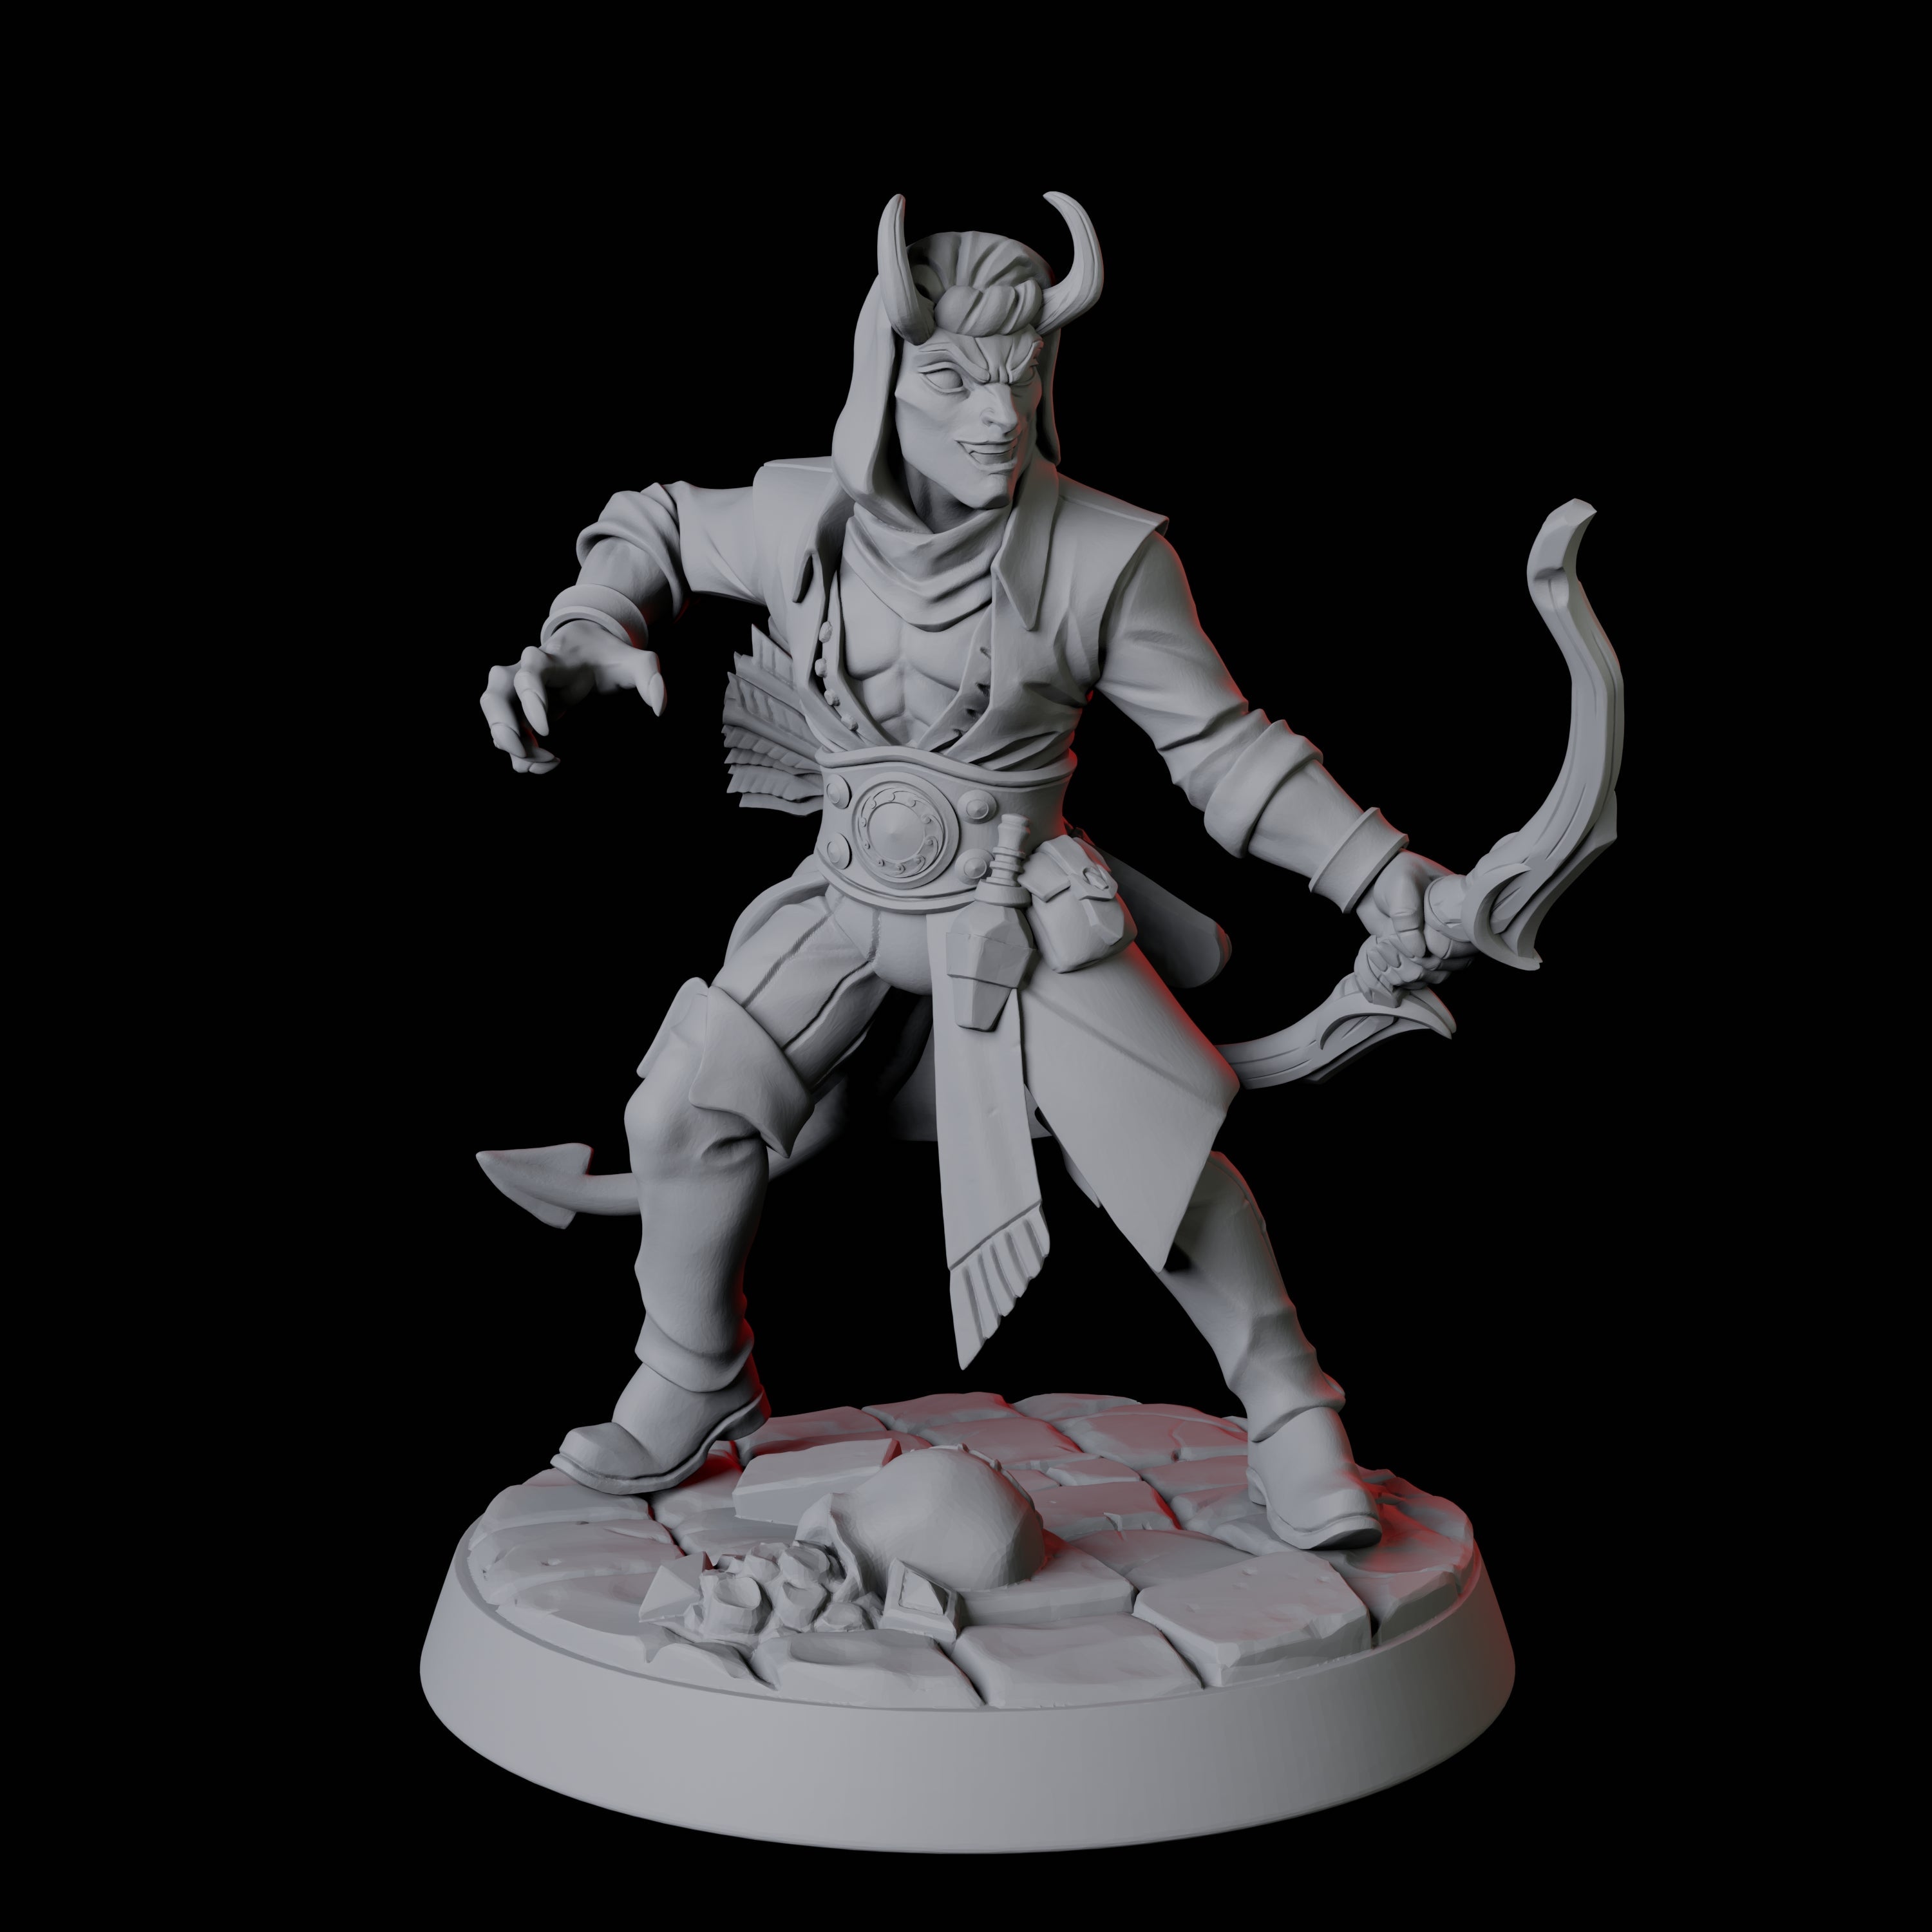 Tiefling Fighter B Miniature for Dungeons and Dragons, Pathfinder or other TTRPGs